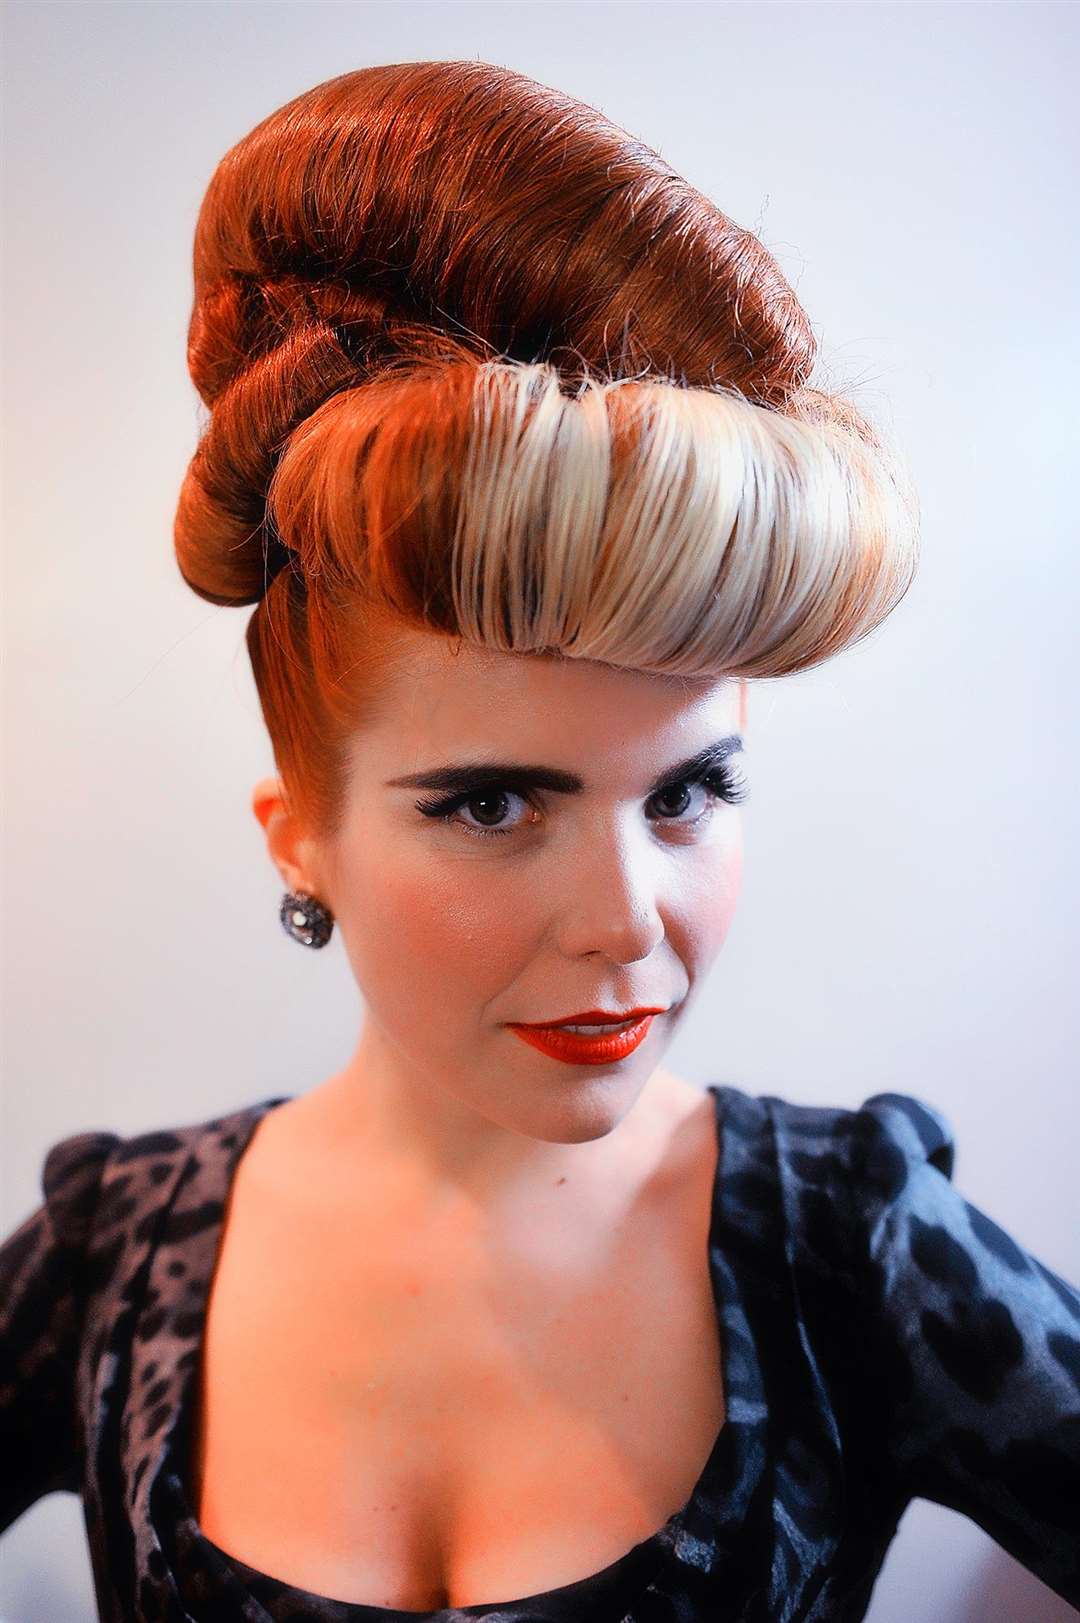 Paloma Faith was one of his favourite artists to work with